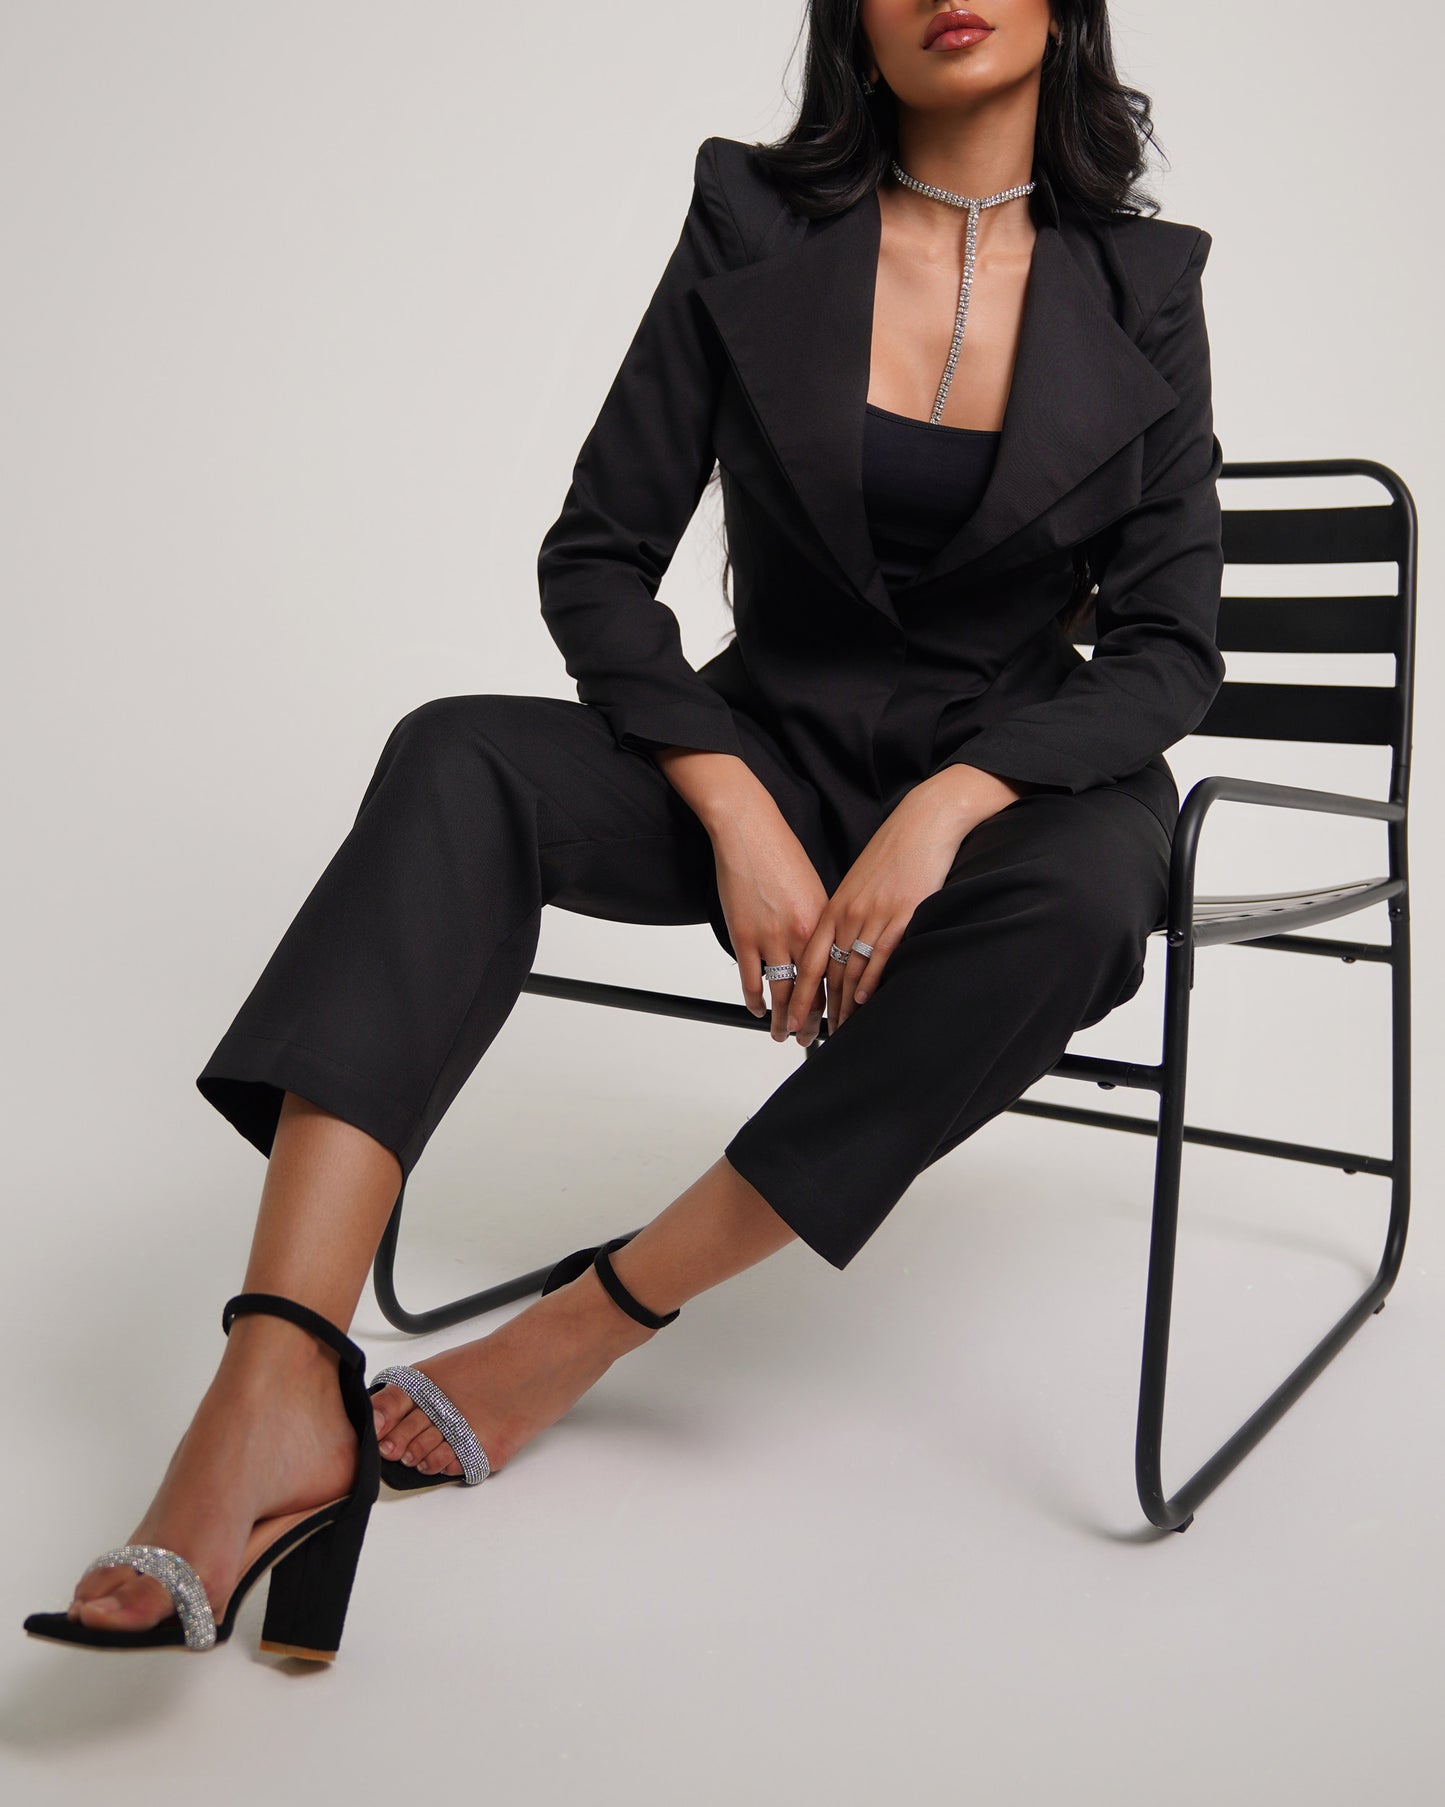 Noir Pointed shoulder double collar blazer paired with straight leg trousers